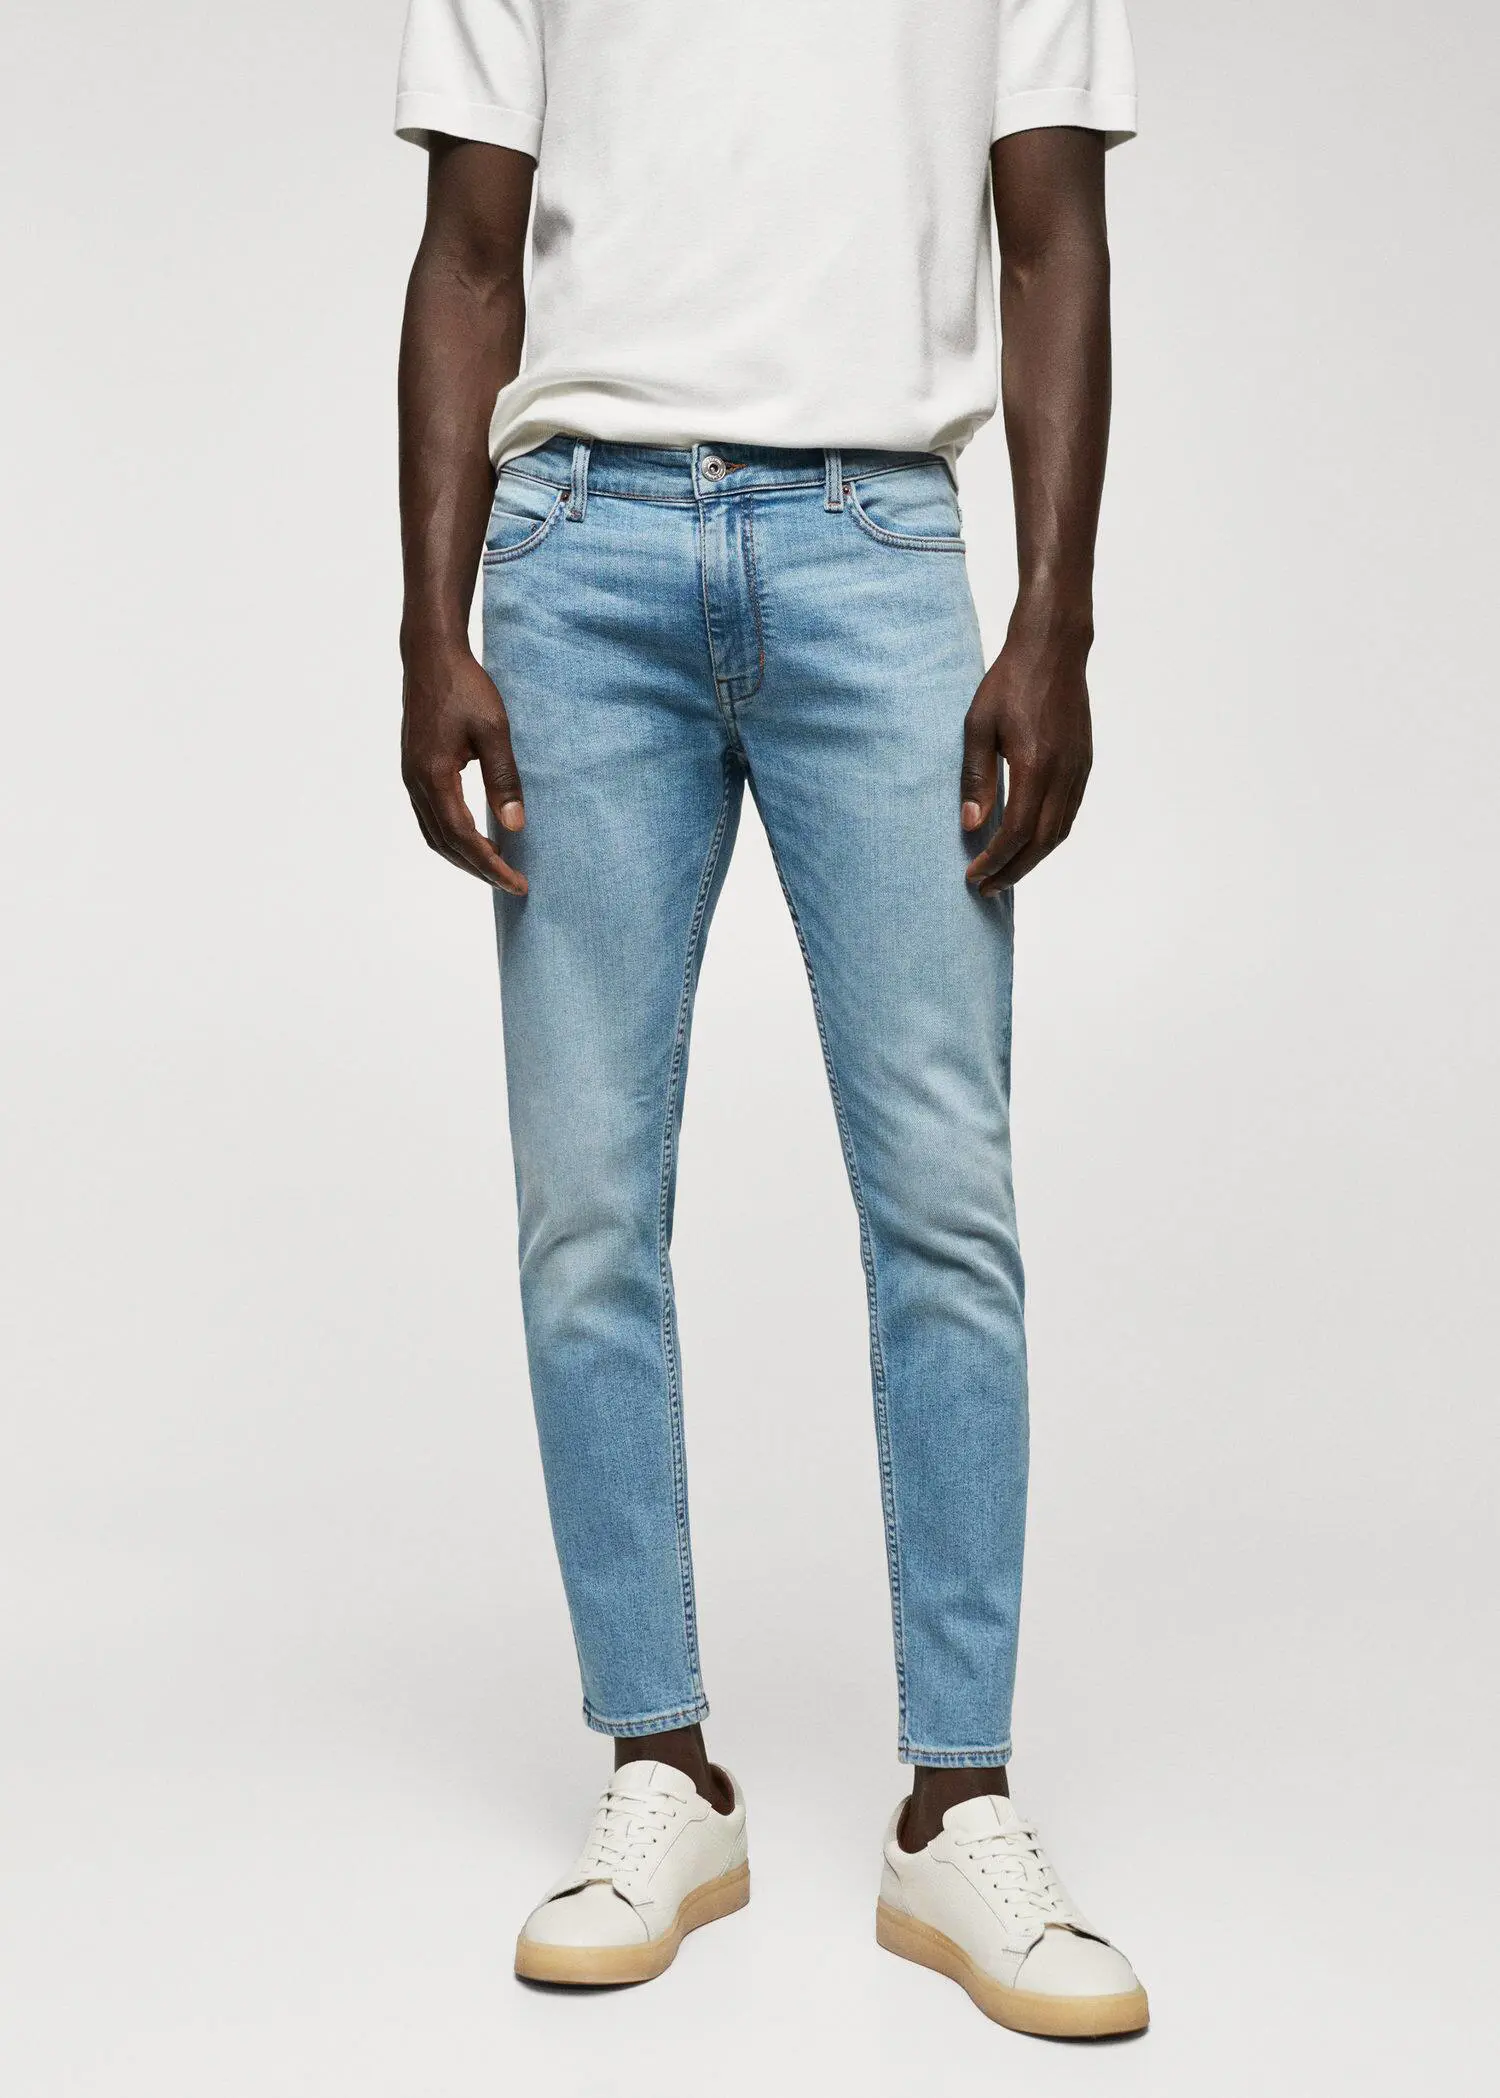 Mango Tom tapered cropped jeans. 2